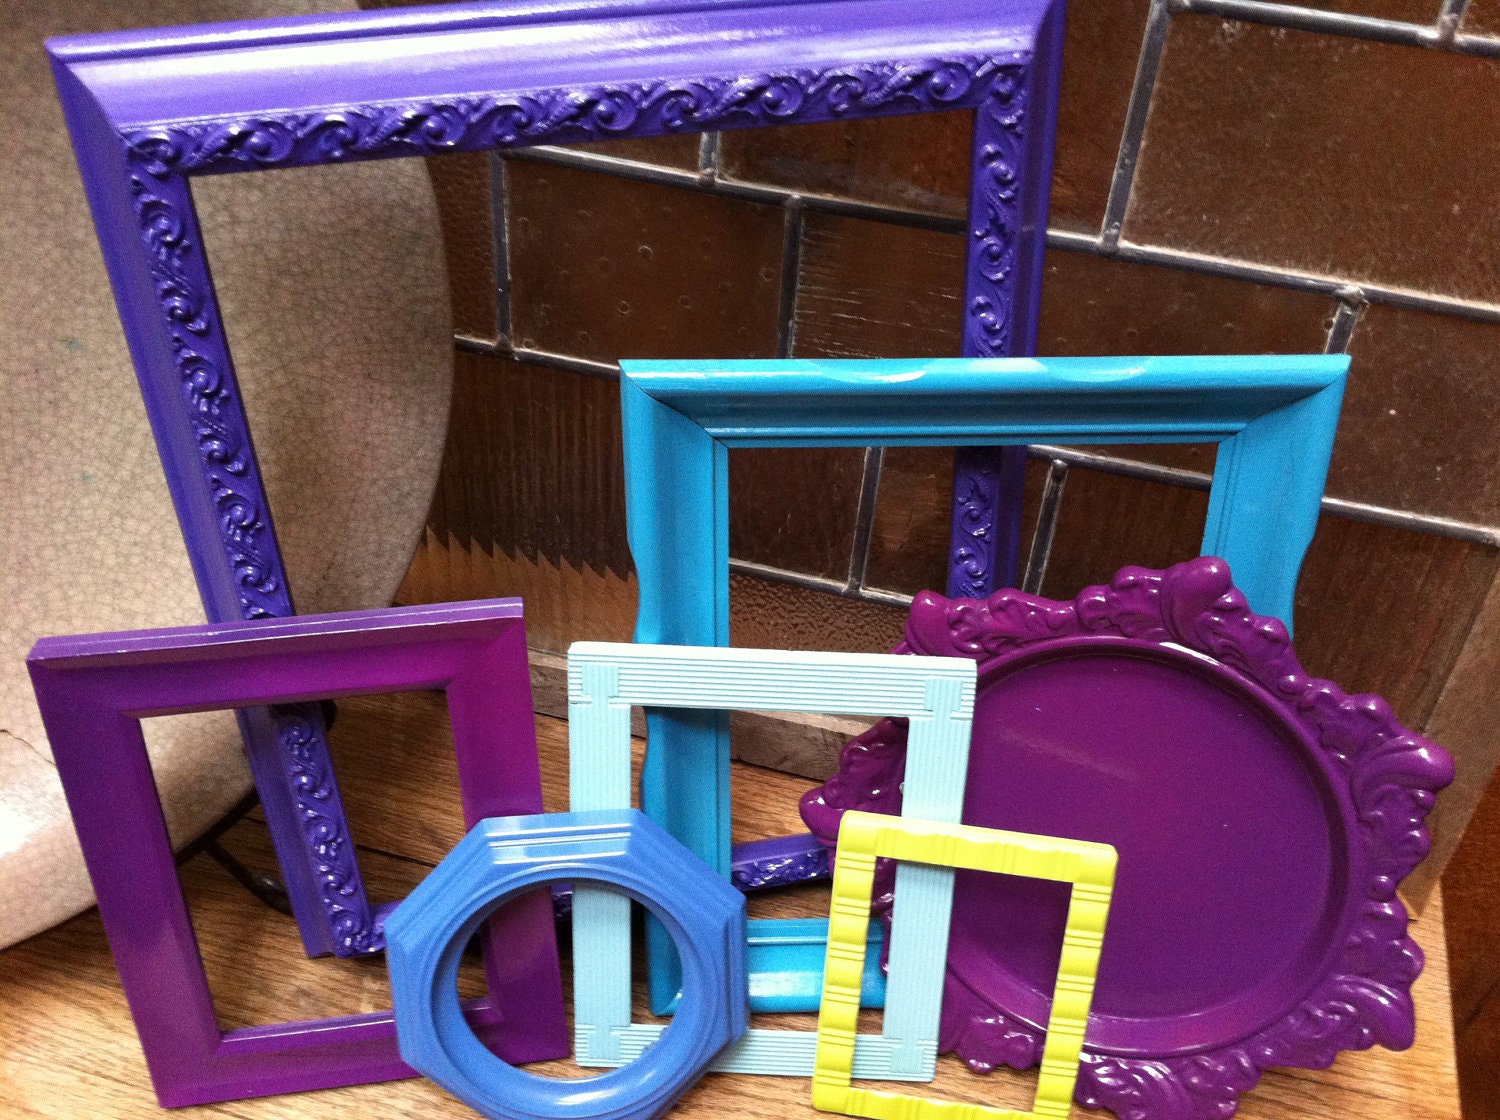 eclectic picture frames